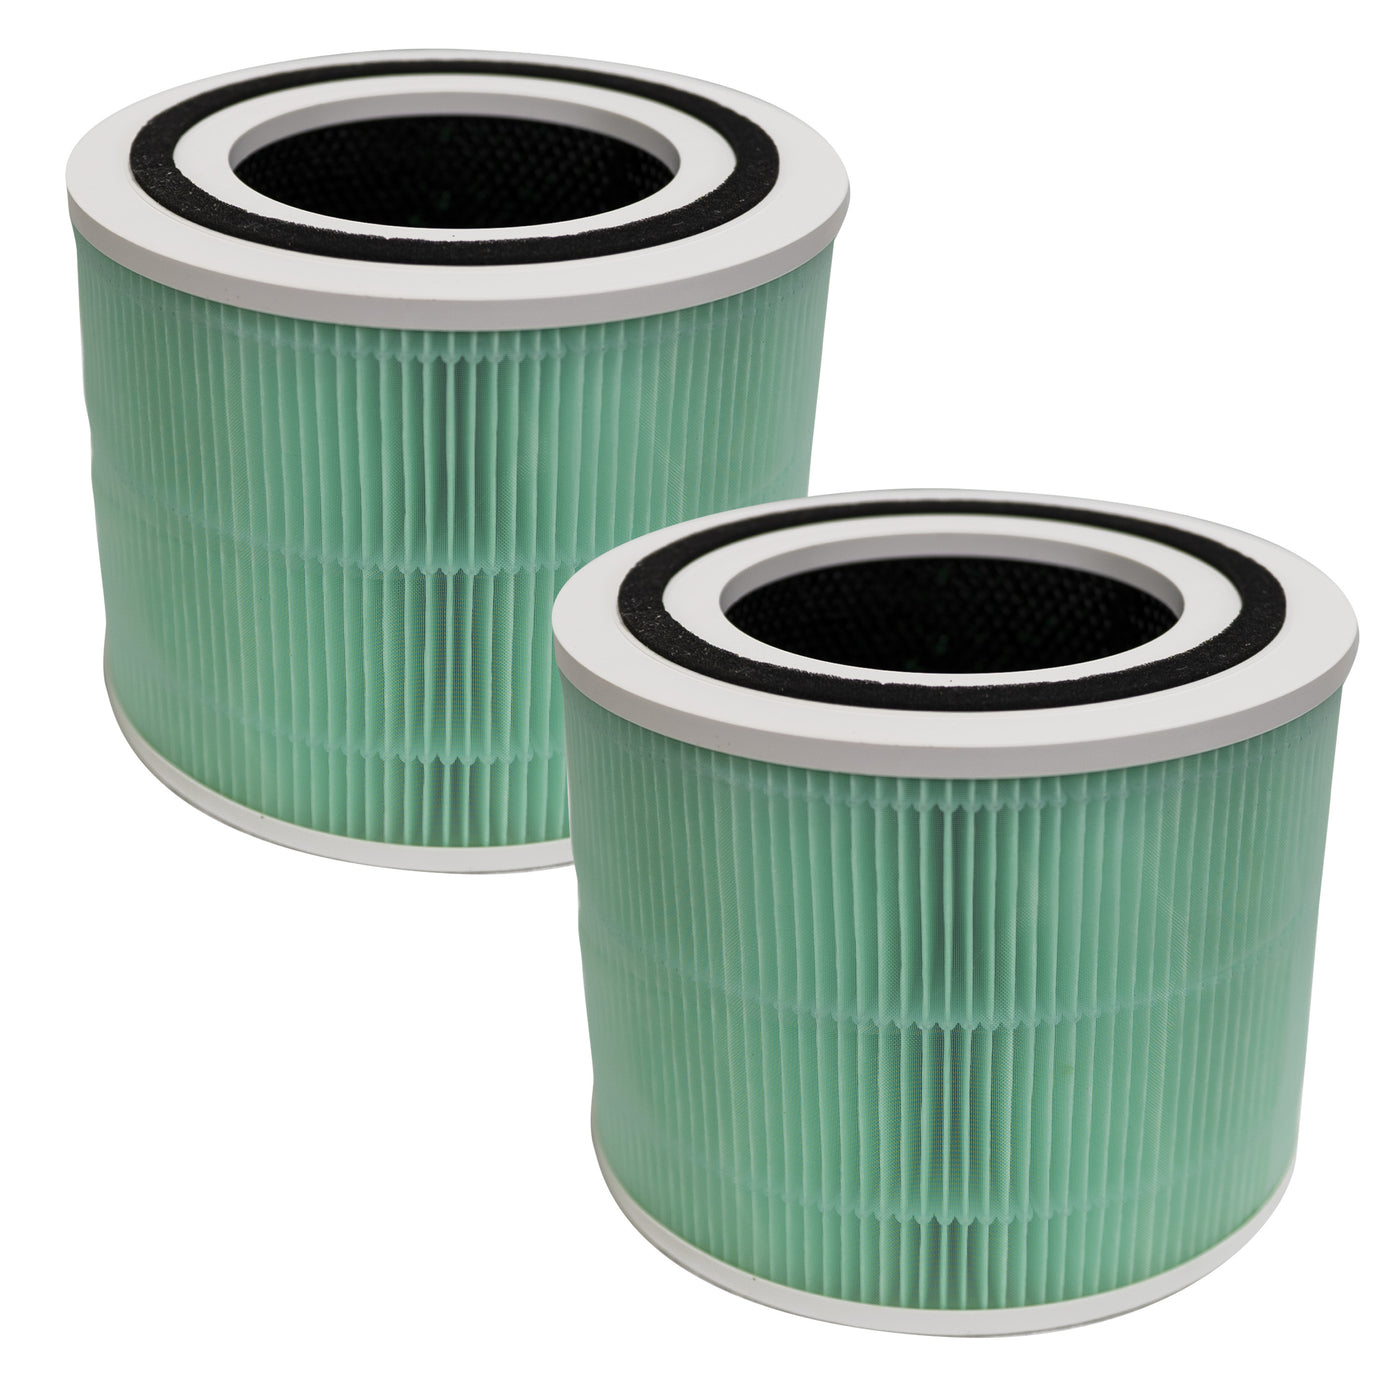 Anycore * Core 300 Filter 3-in-1 H 13 True HEPA Replacement Filter Core.  NOB